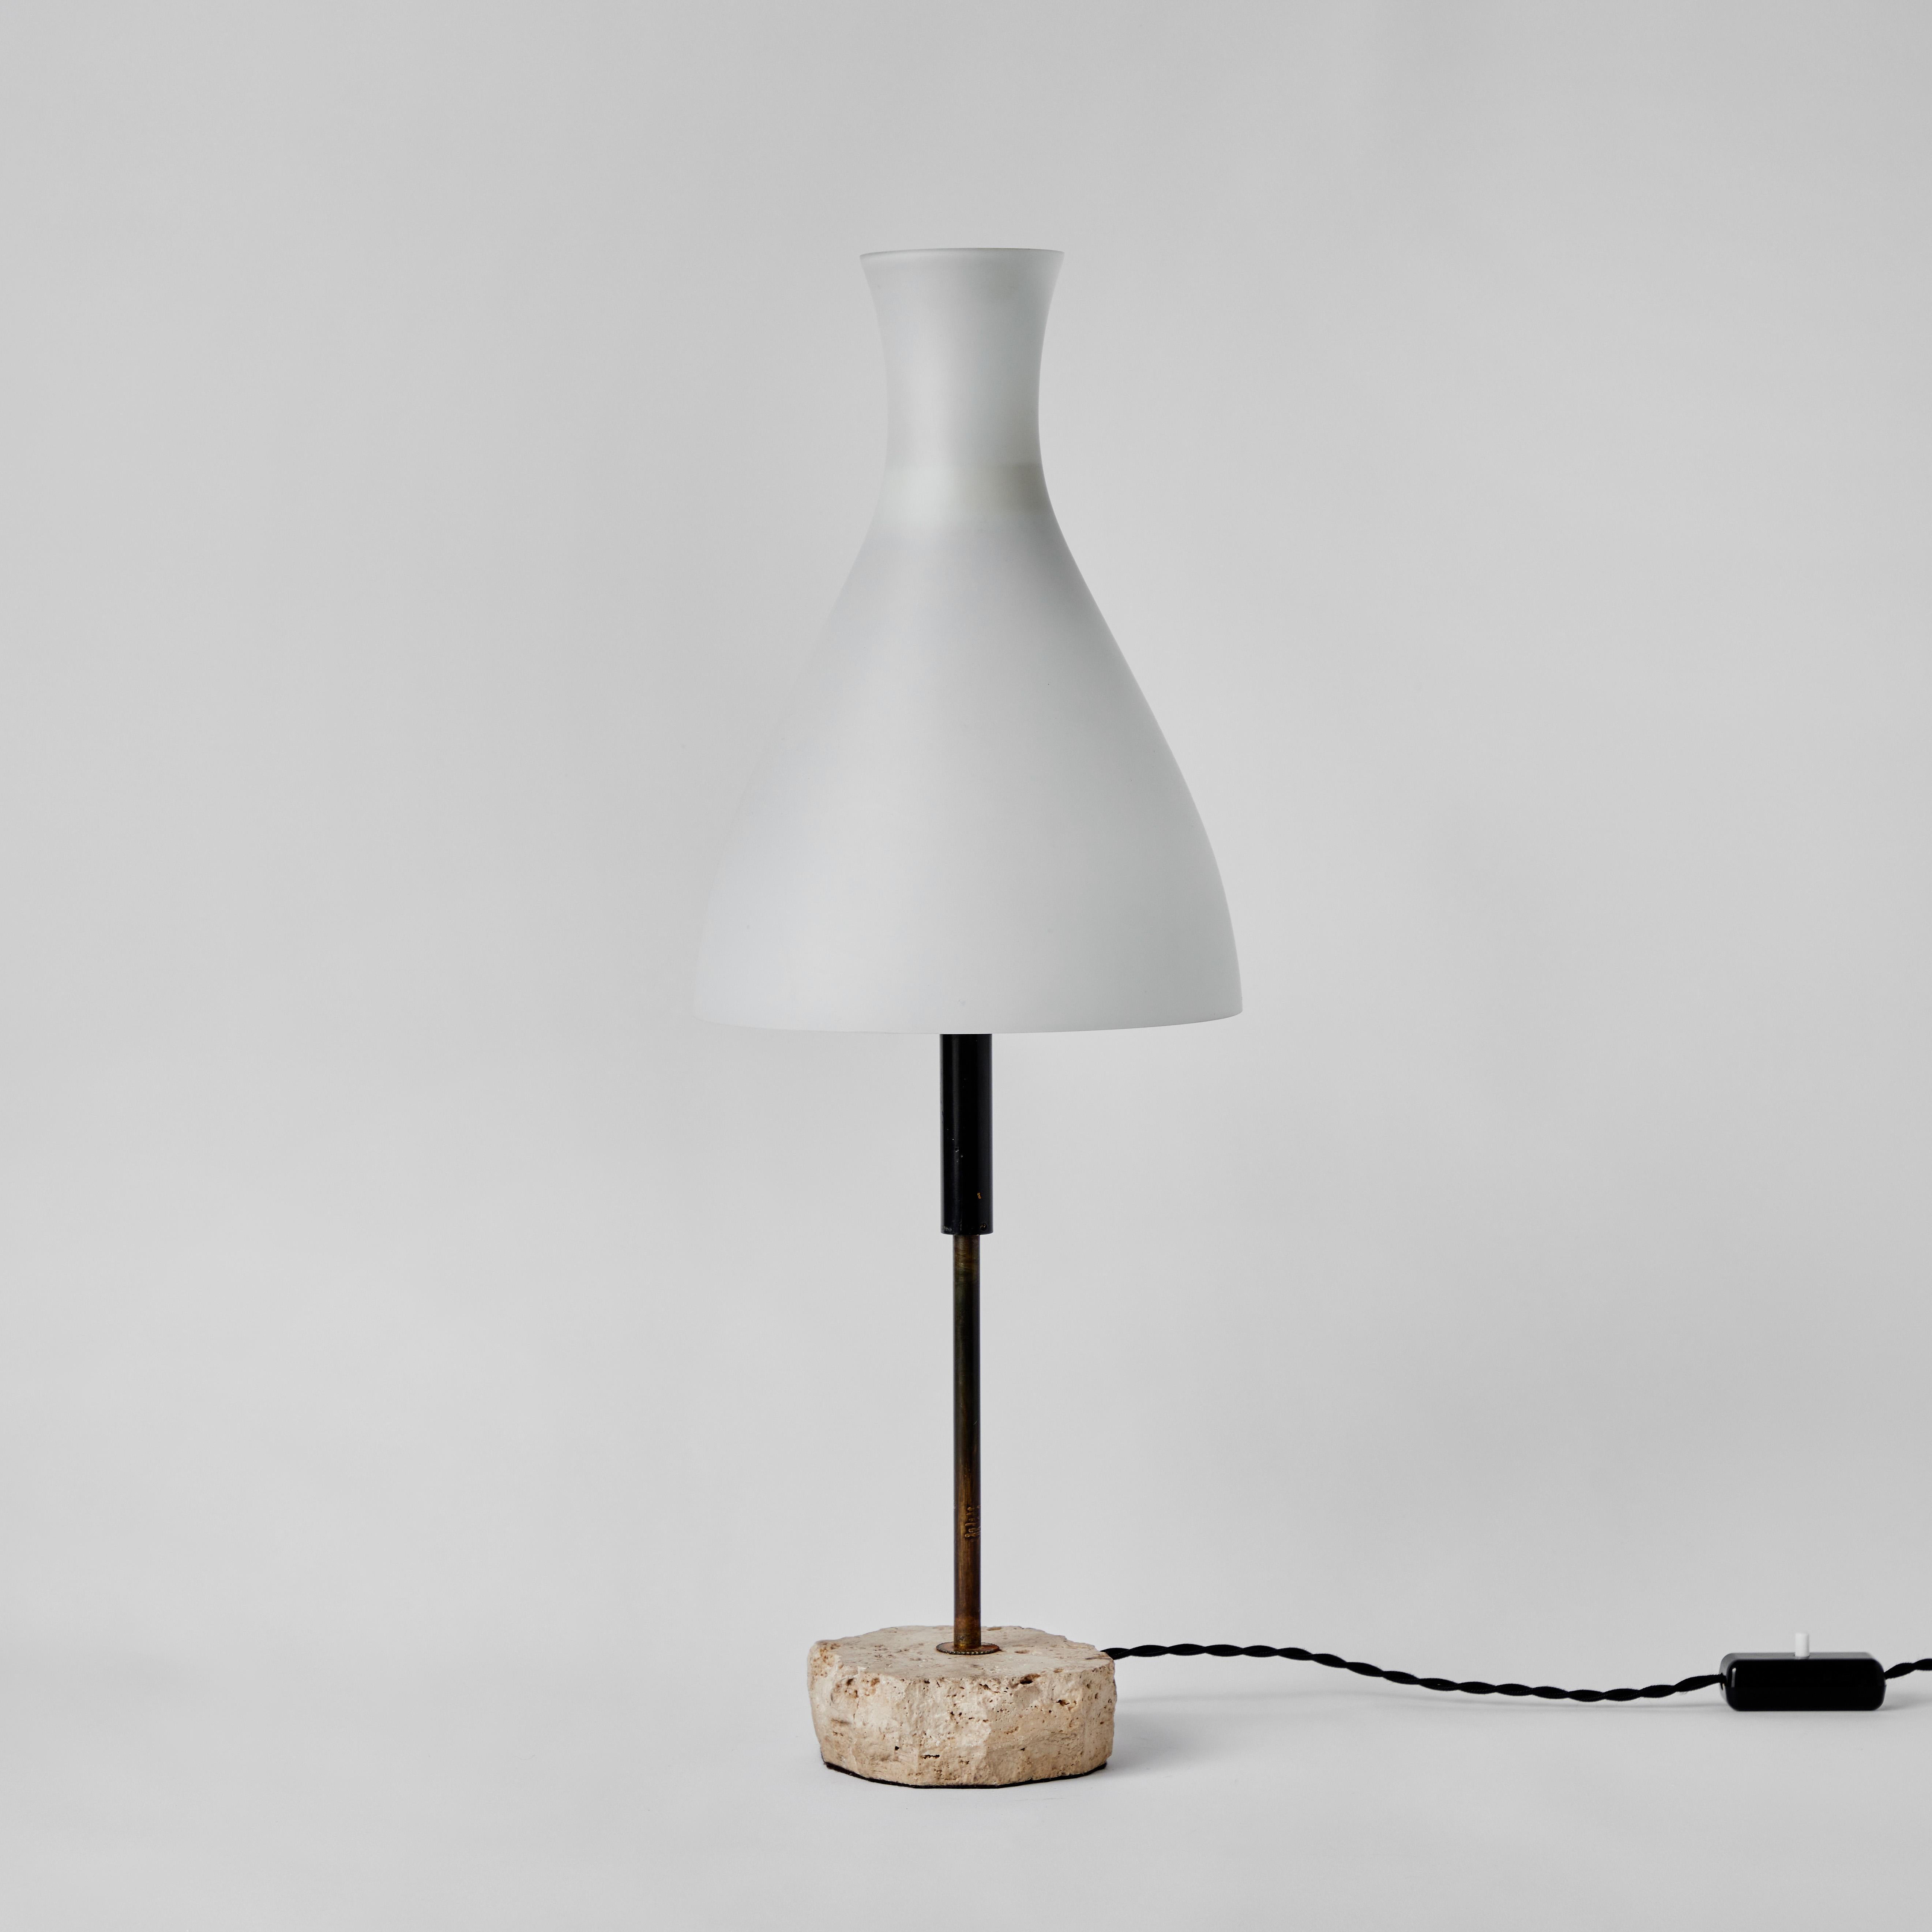 1950s Gilardi & Barzaghi Glass and Marble Table Lamp in the Manner of Arredoluce 2